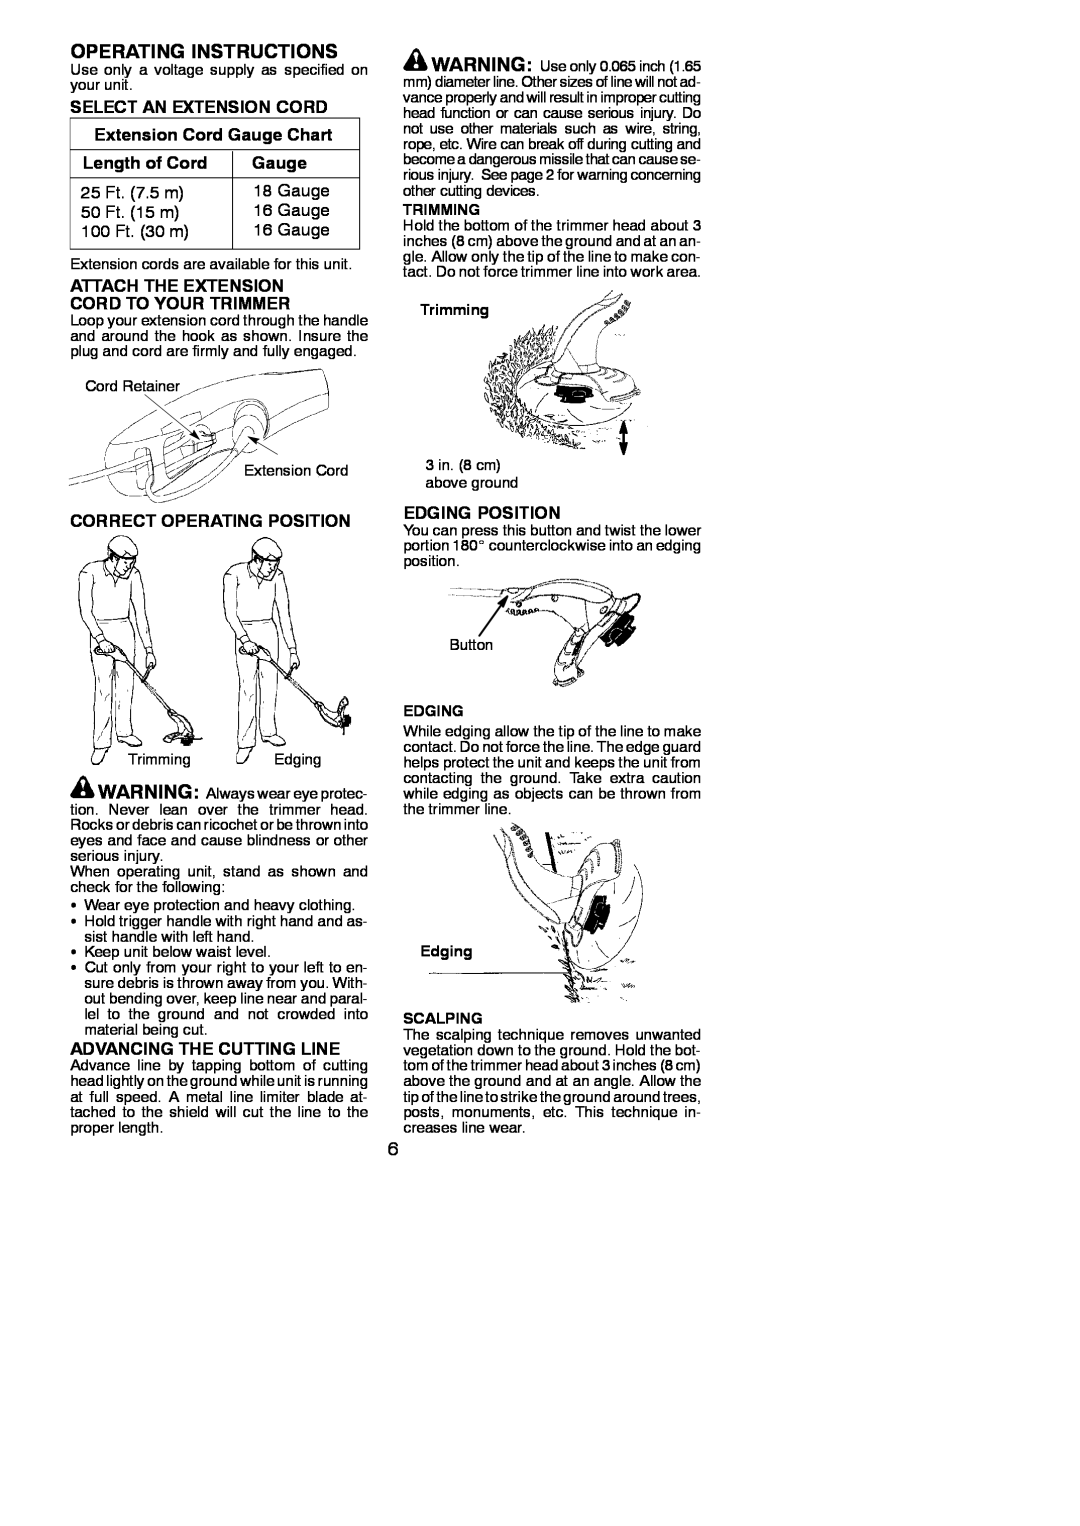 Weed Eater 952711905 Operating Instructions, Select An Extension Cord, Extension Cord Gauge Chart, Length of Cord, Edging 